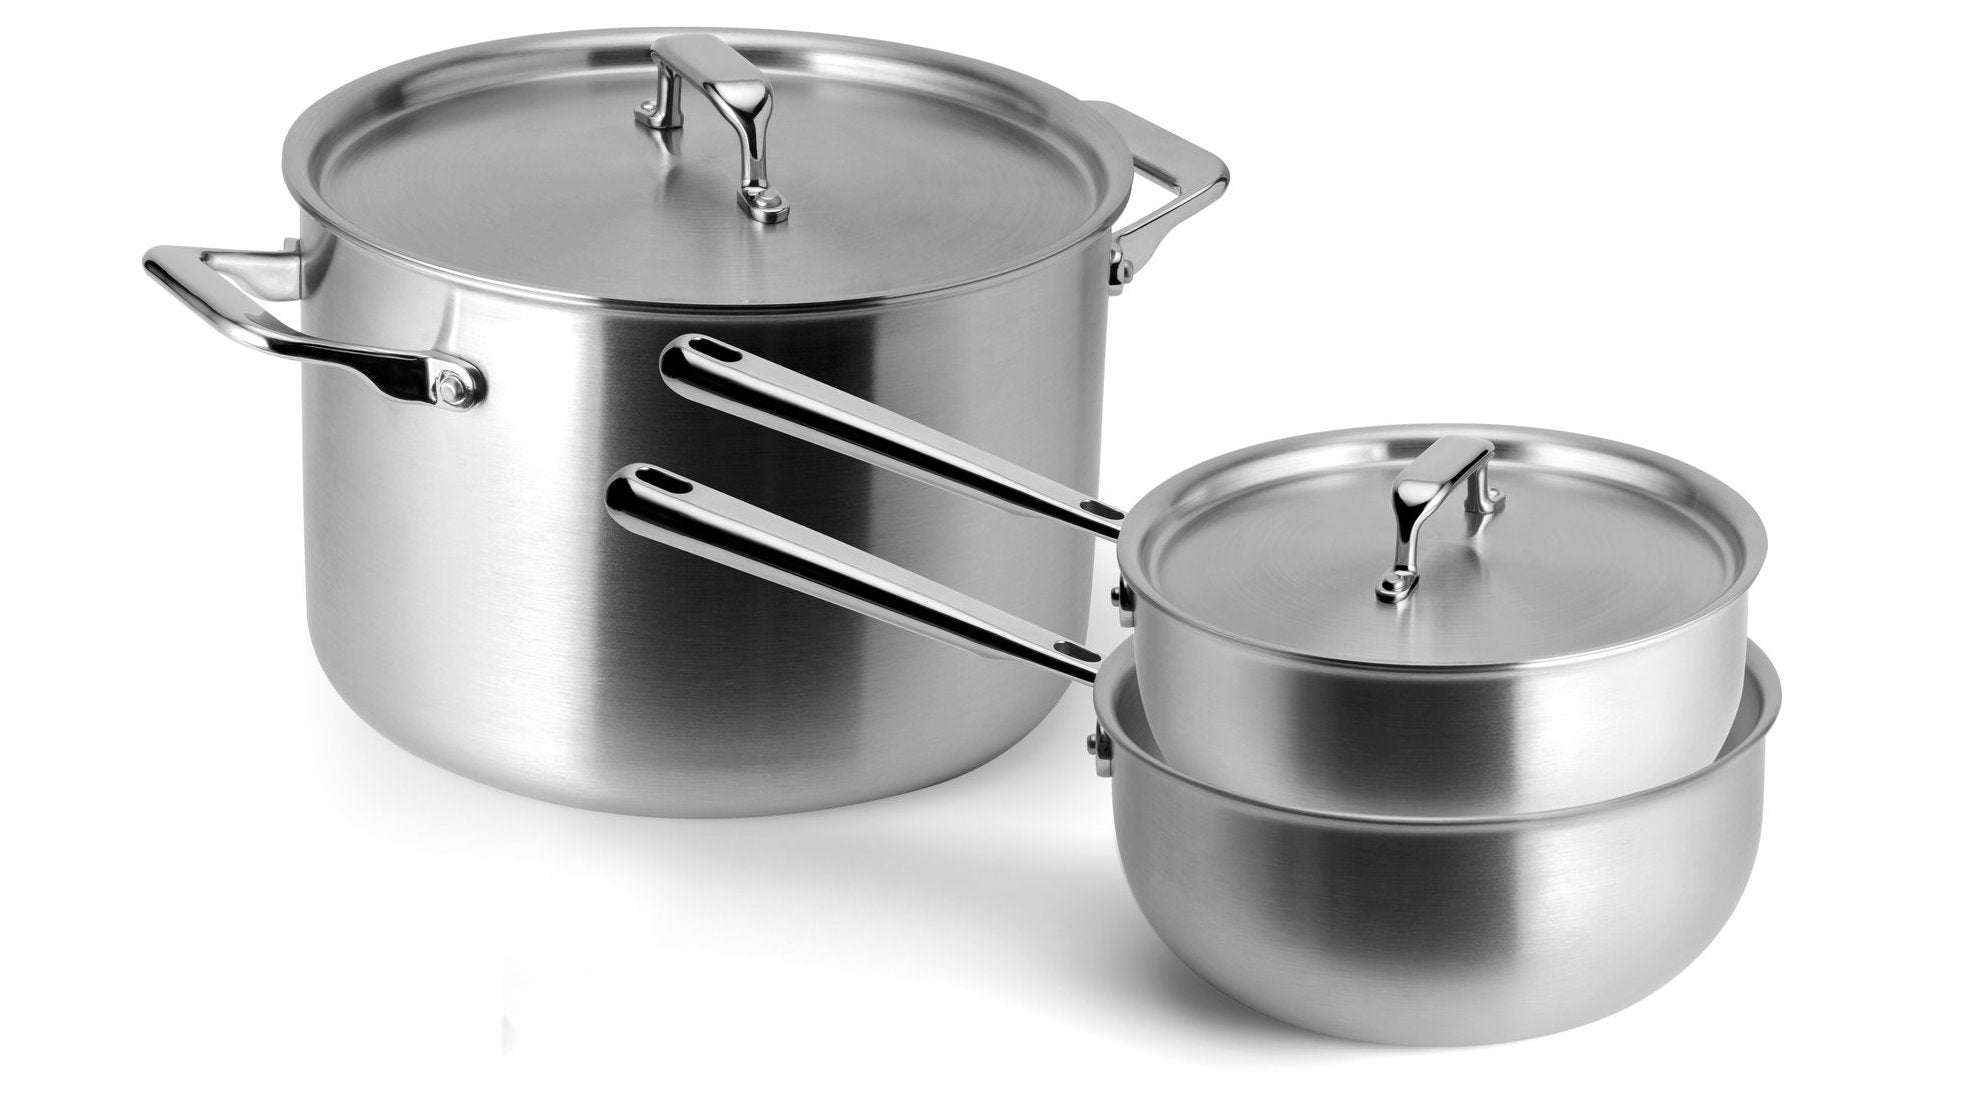 A stainless steel stockpot and sauciers: some of the best cookware for glass top stoves